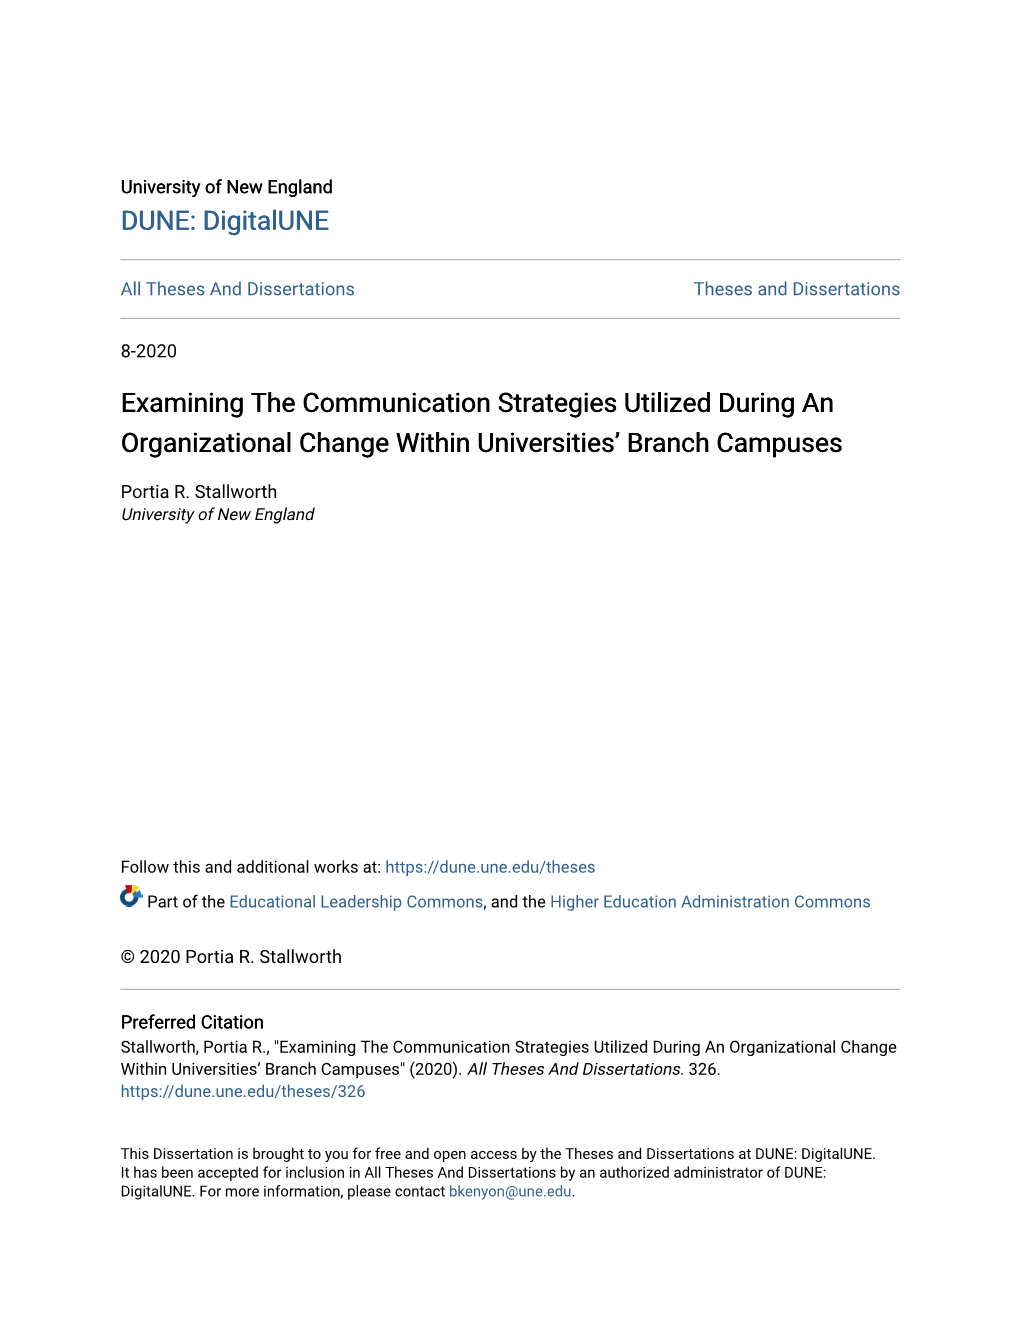 Examining the Communication Strategies Utilized During an Organizational Change Within Universities’ Branch Campuses